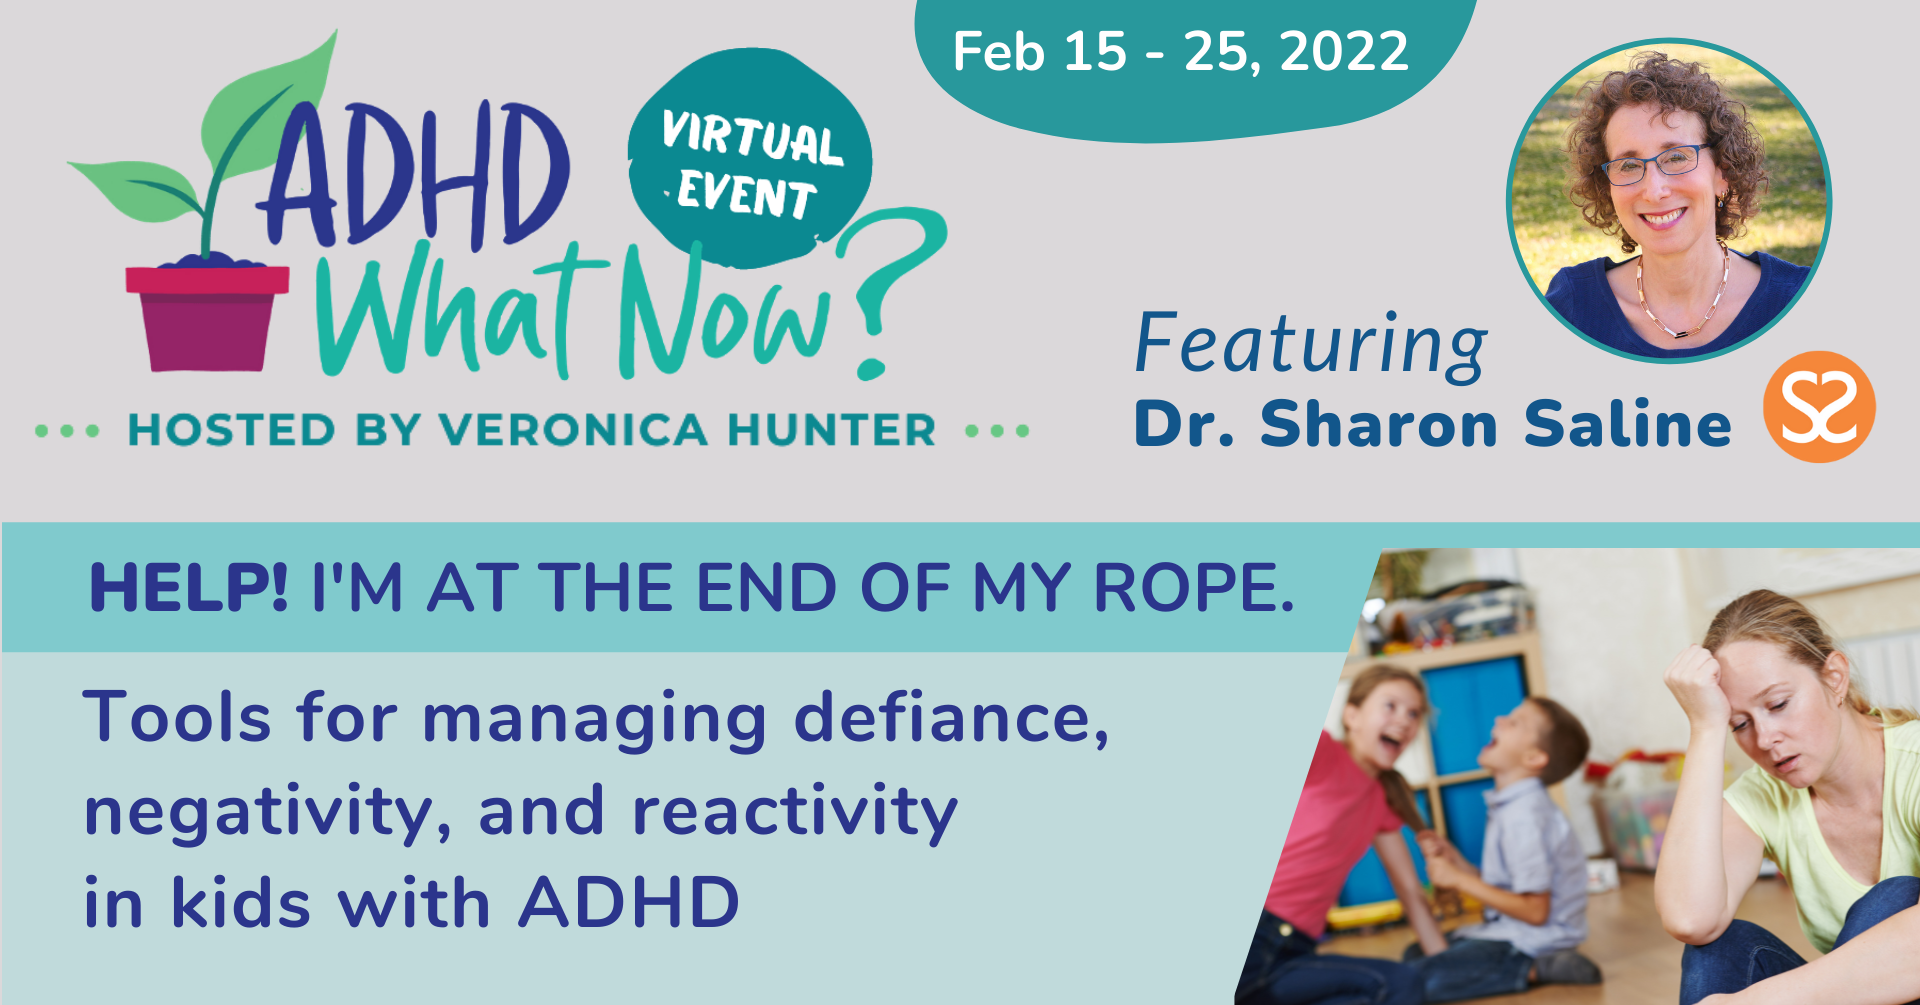 ADHD What Now 2022 Graphic, Featuring Dr. Sharon Saline